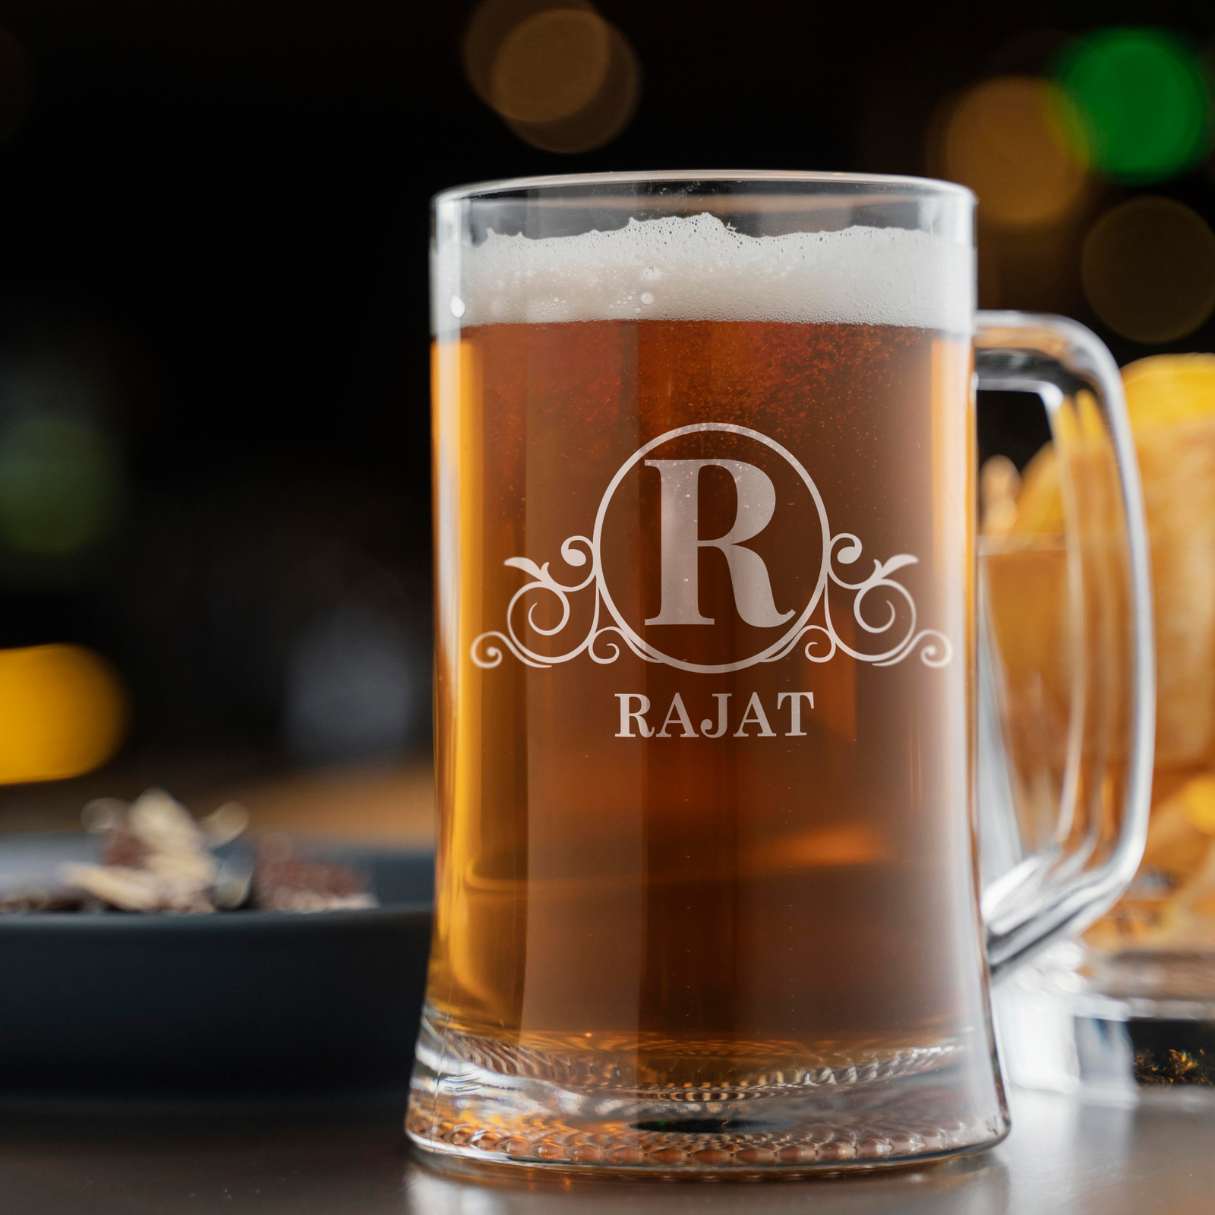 Review: Personalized Beer Mug - The Perfect Gift for Beer Enthusiasts